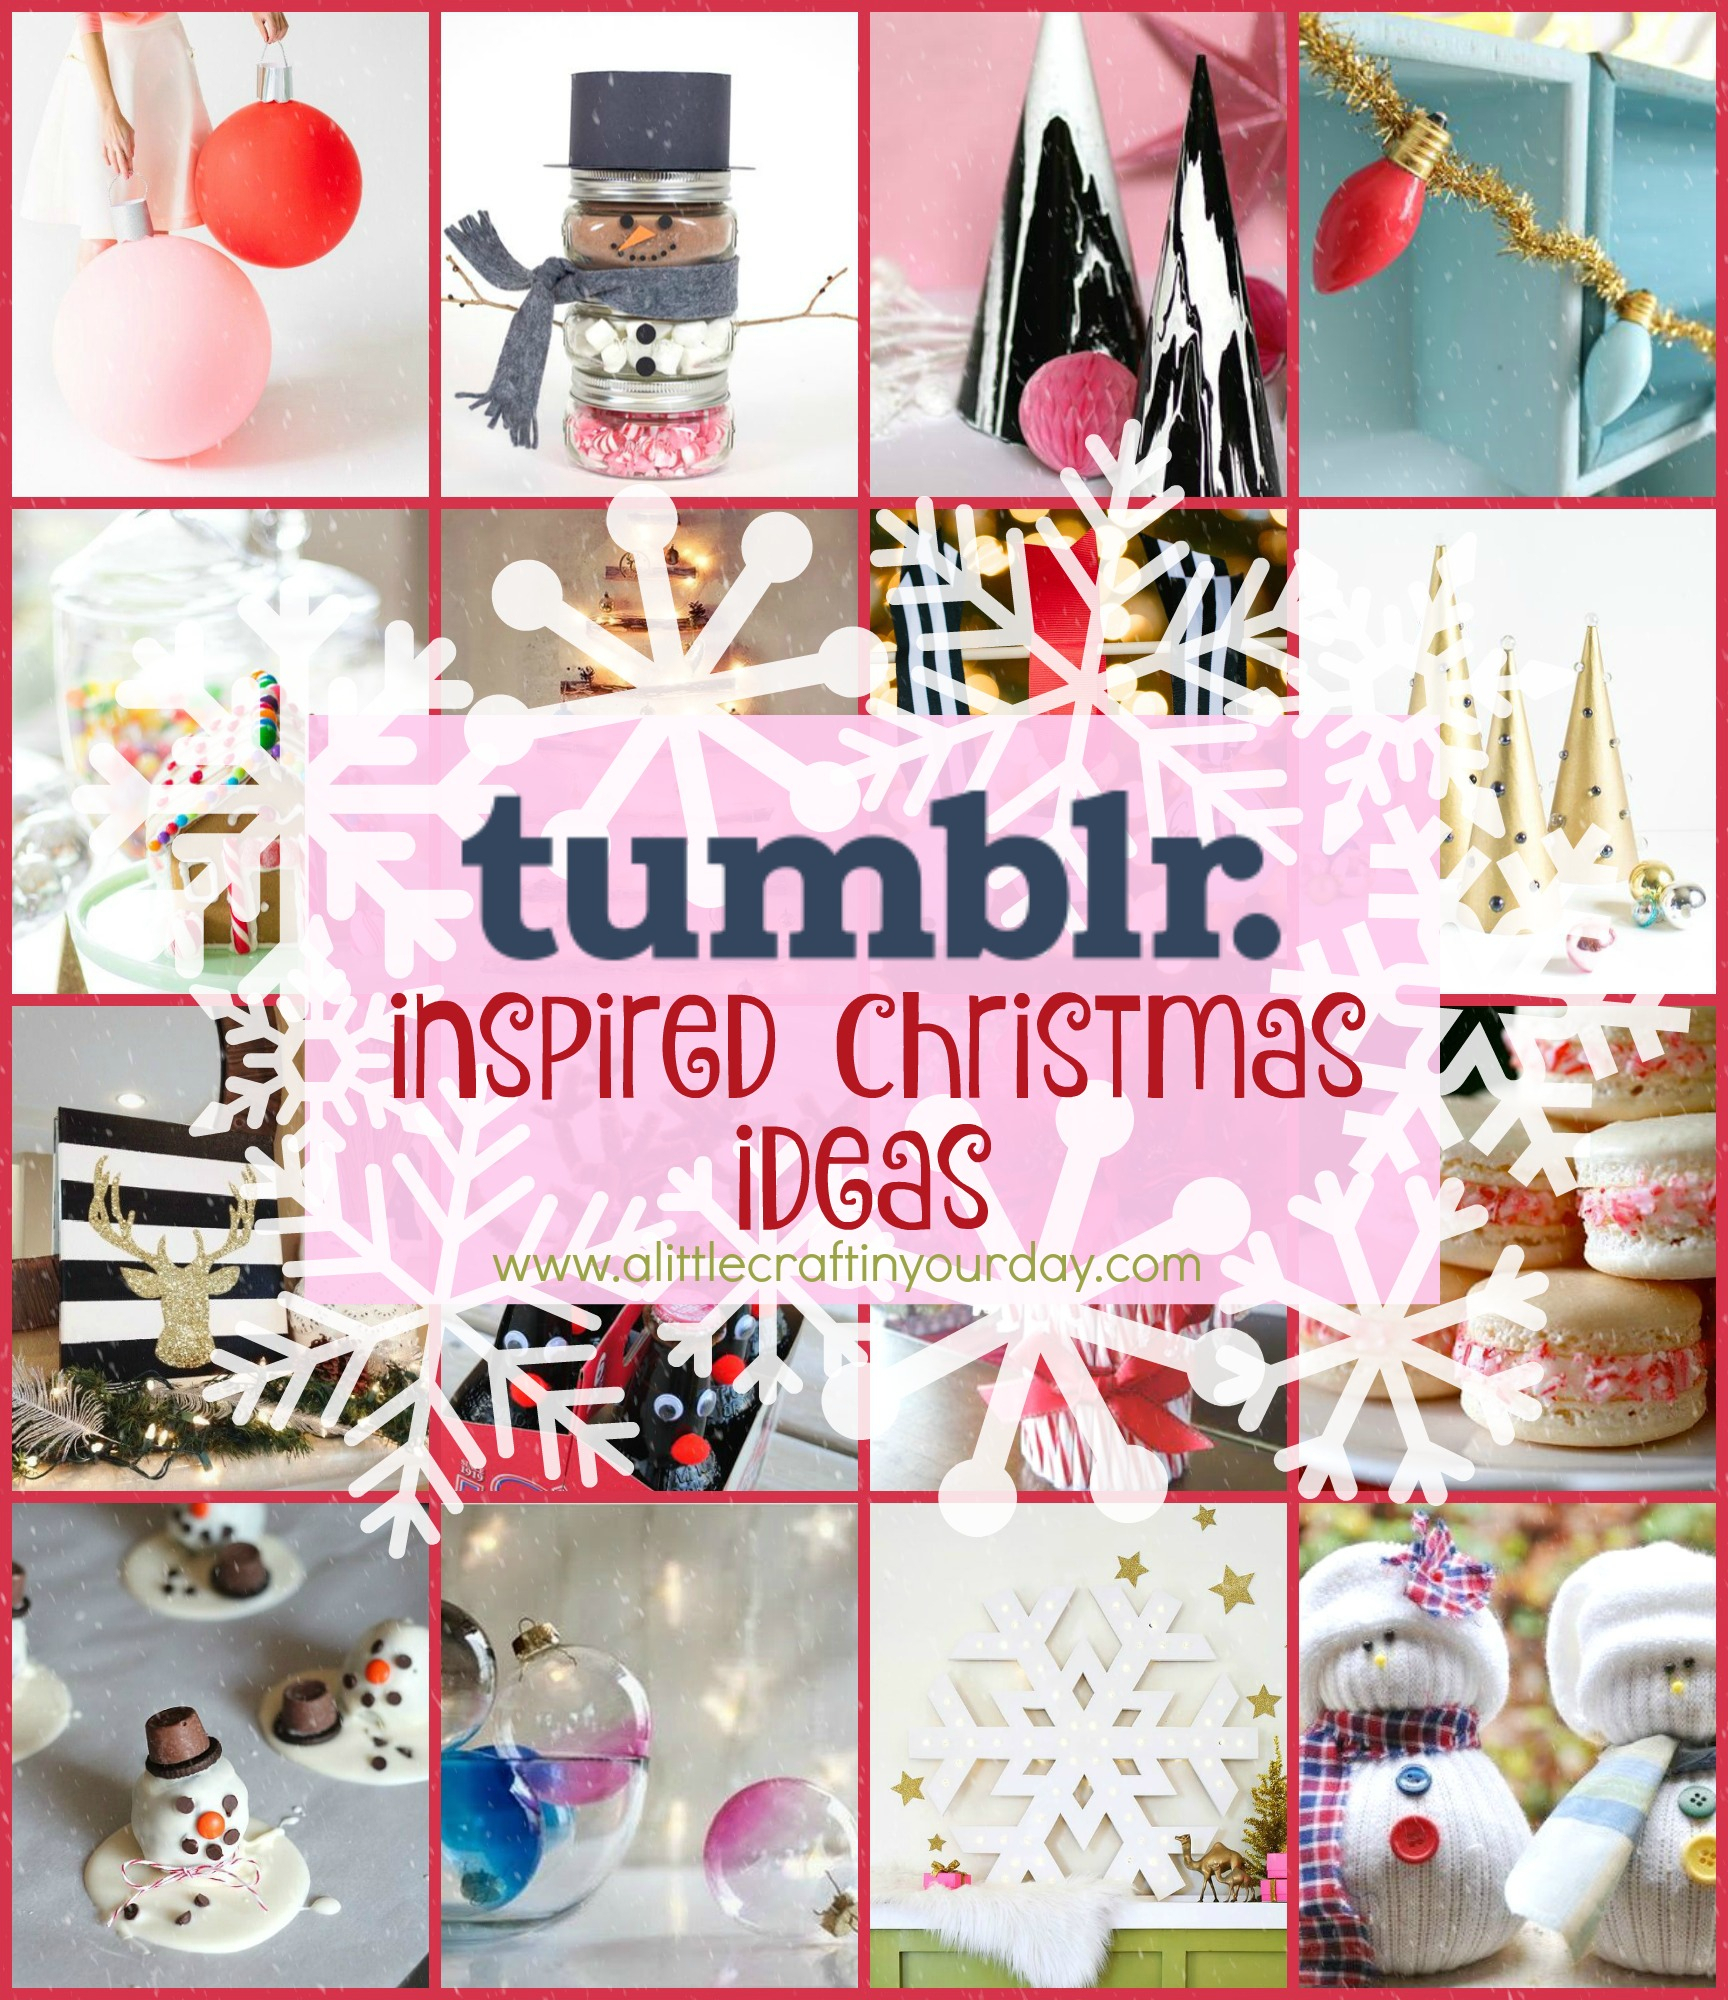 10 Best Christmas Craft Ideas On Pinterest tumblr inspired diy christmas a little craft in your day 2022